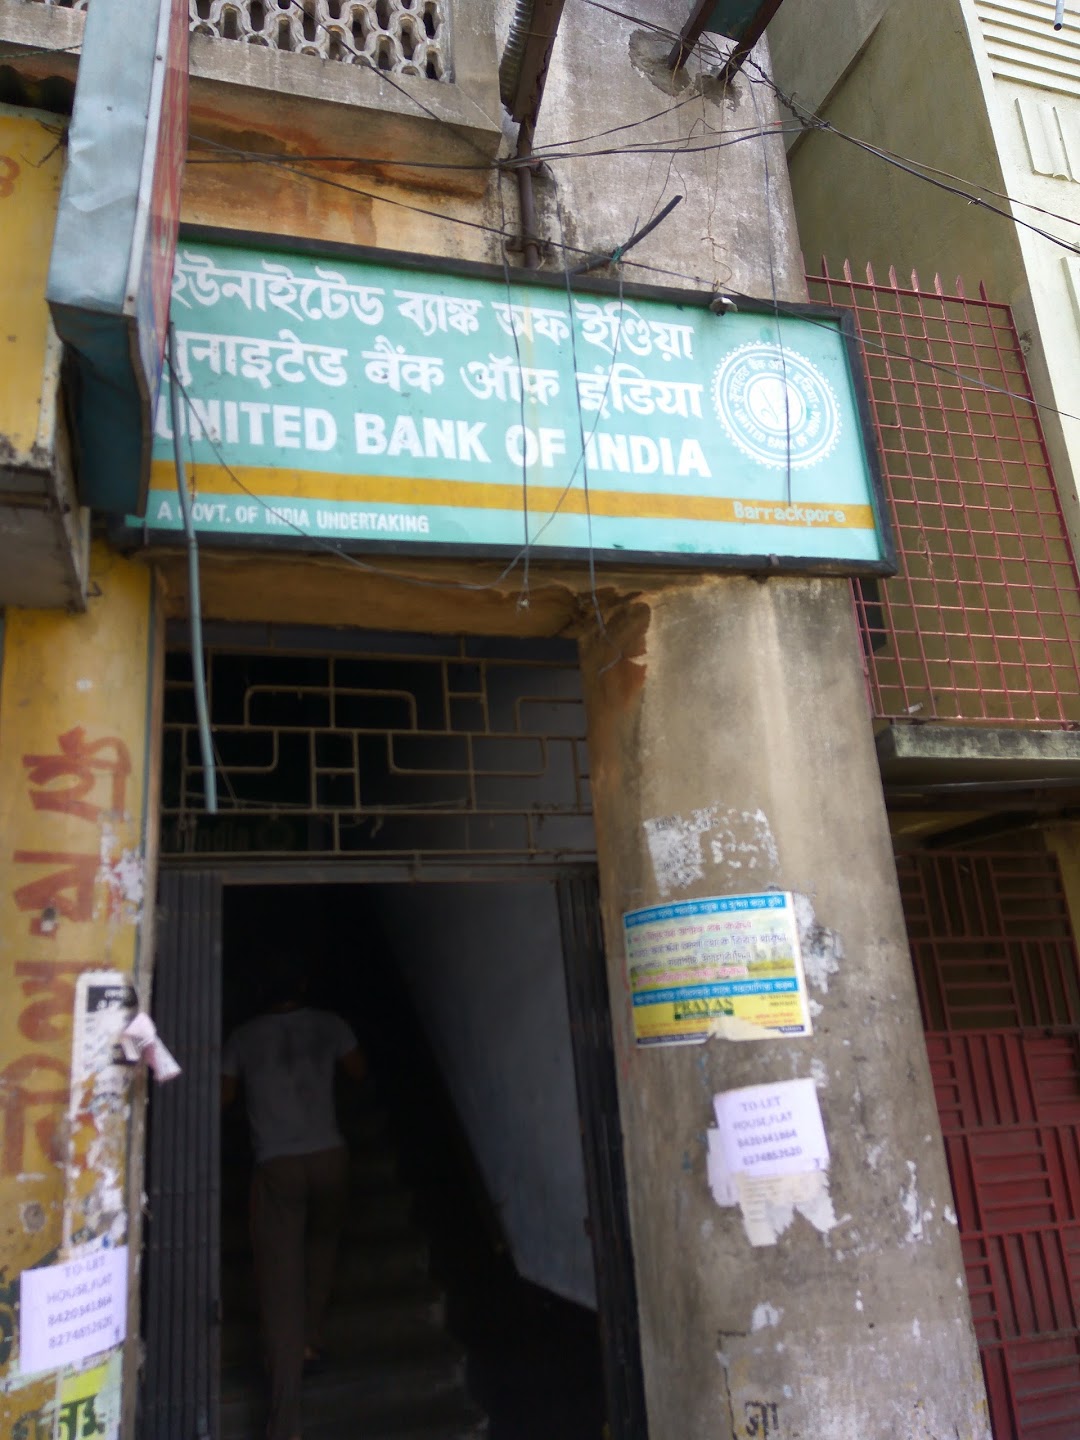 United Bank of India - Barrackpore Branch